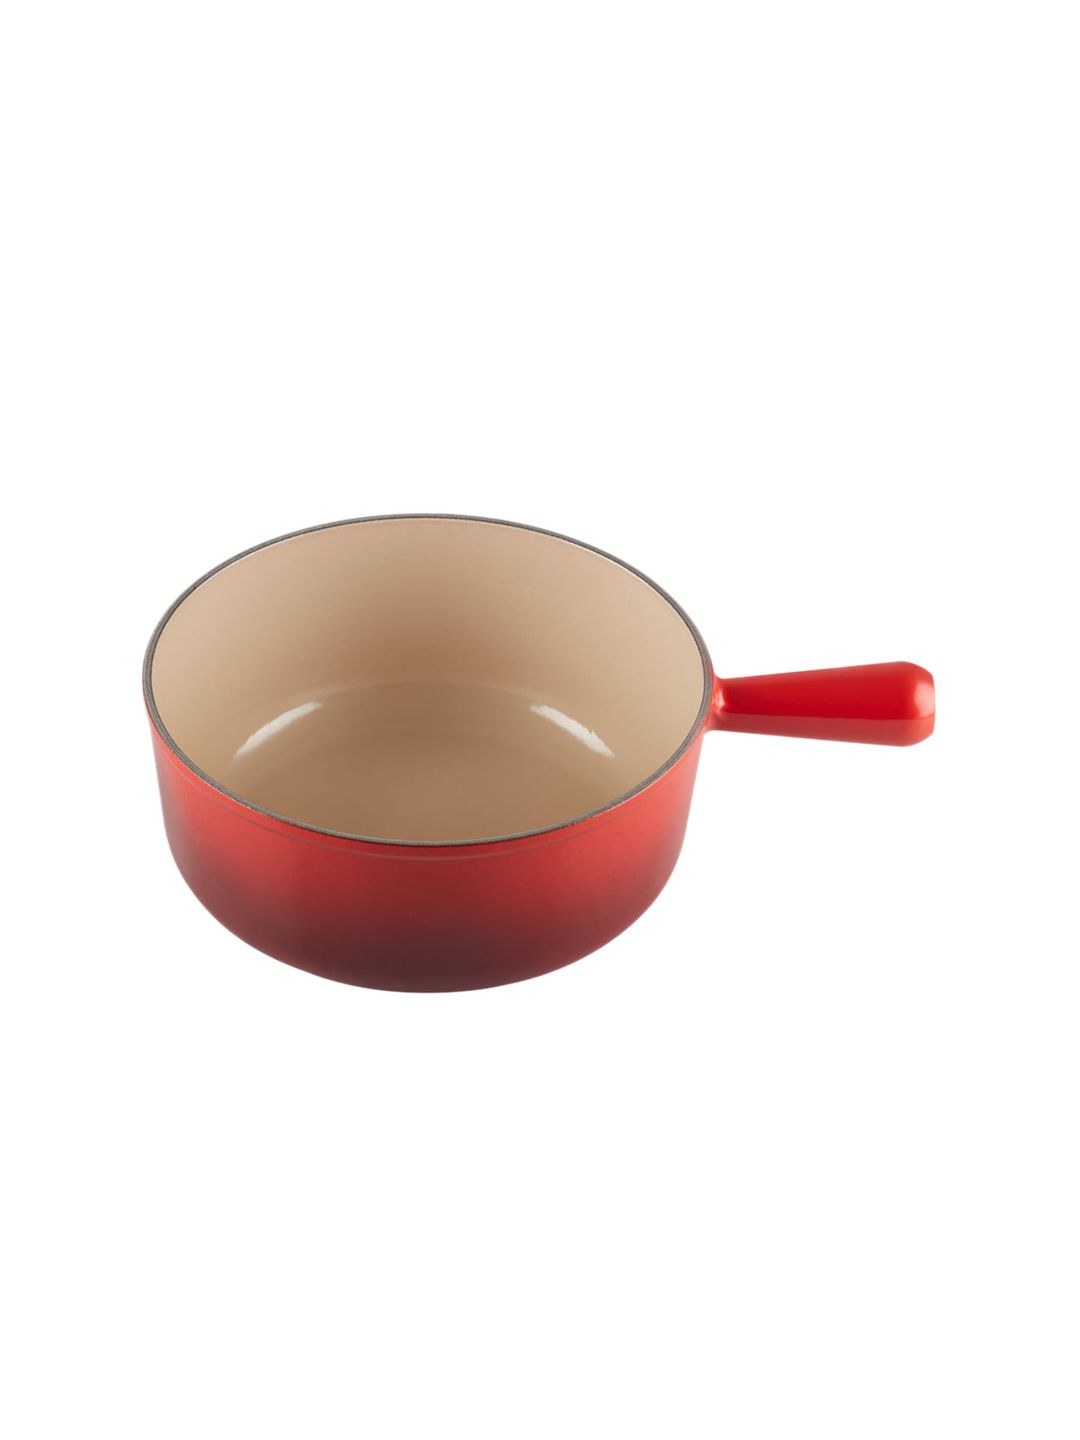 LE CREUSET Red Solid Iron Saucepan Price in India